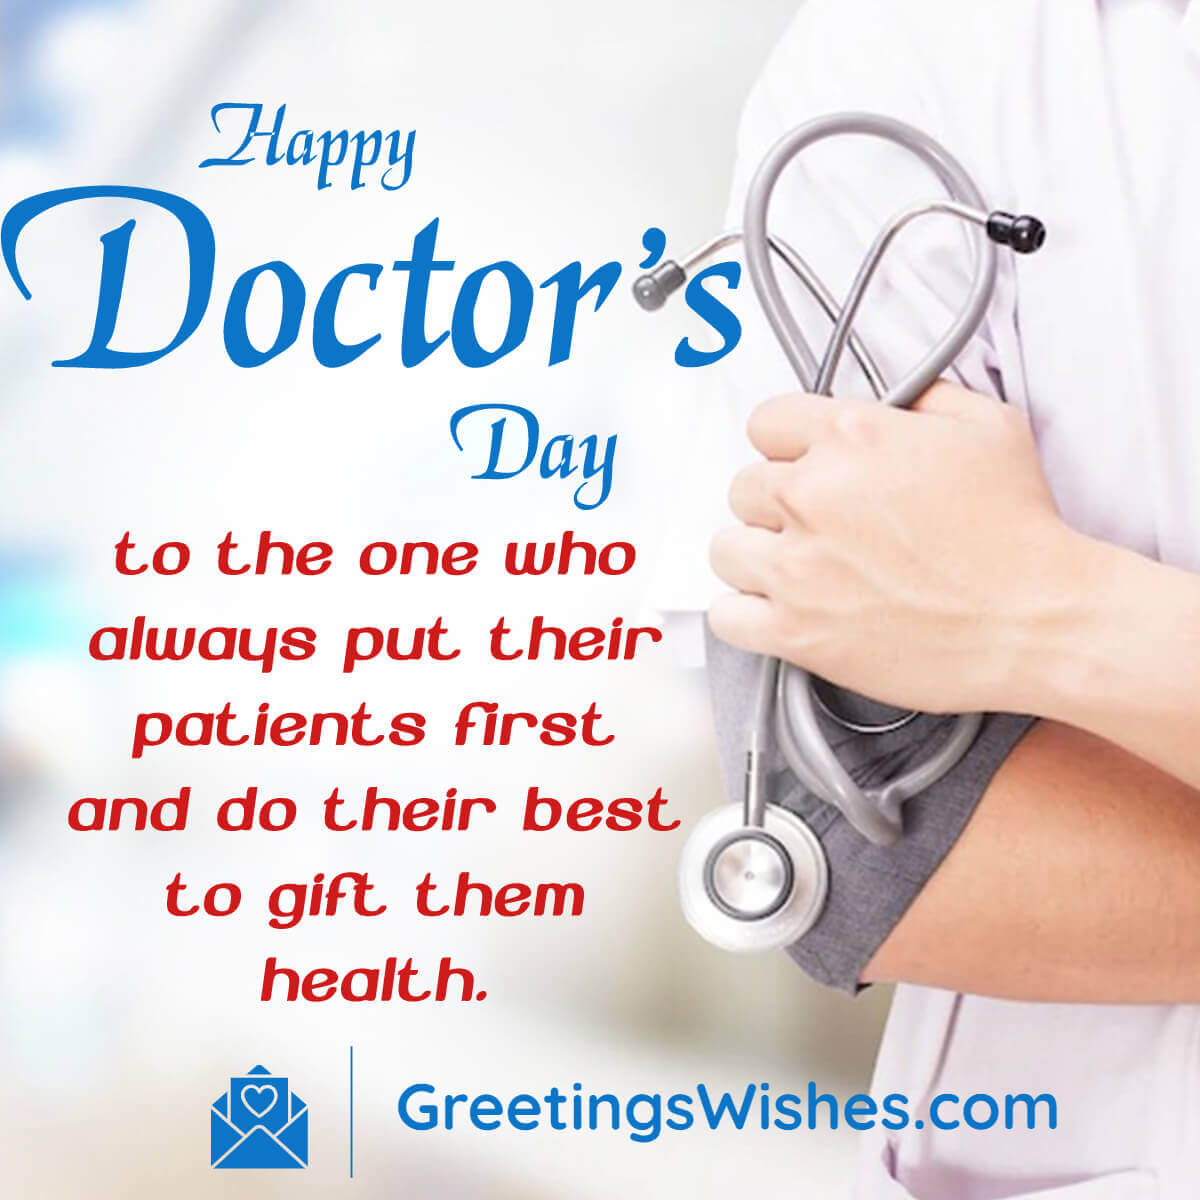 National Doctors' Day India